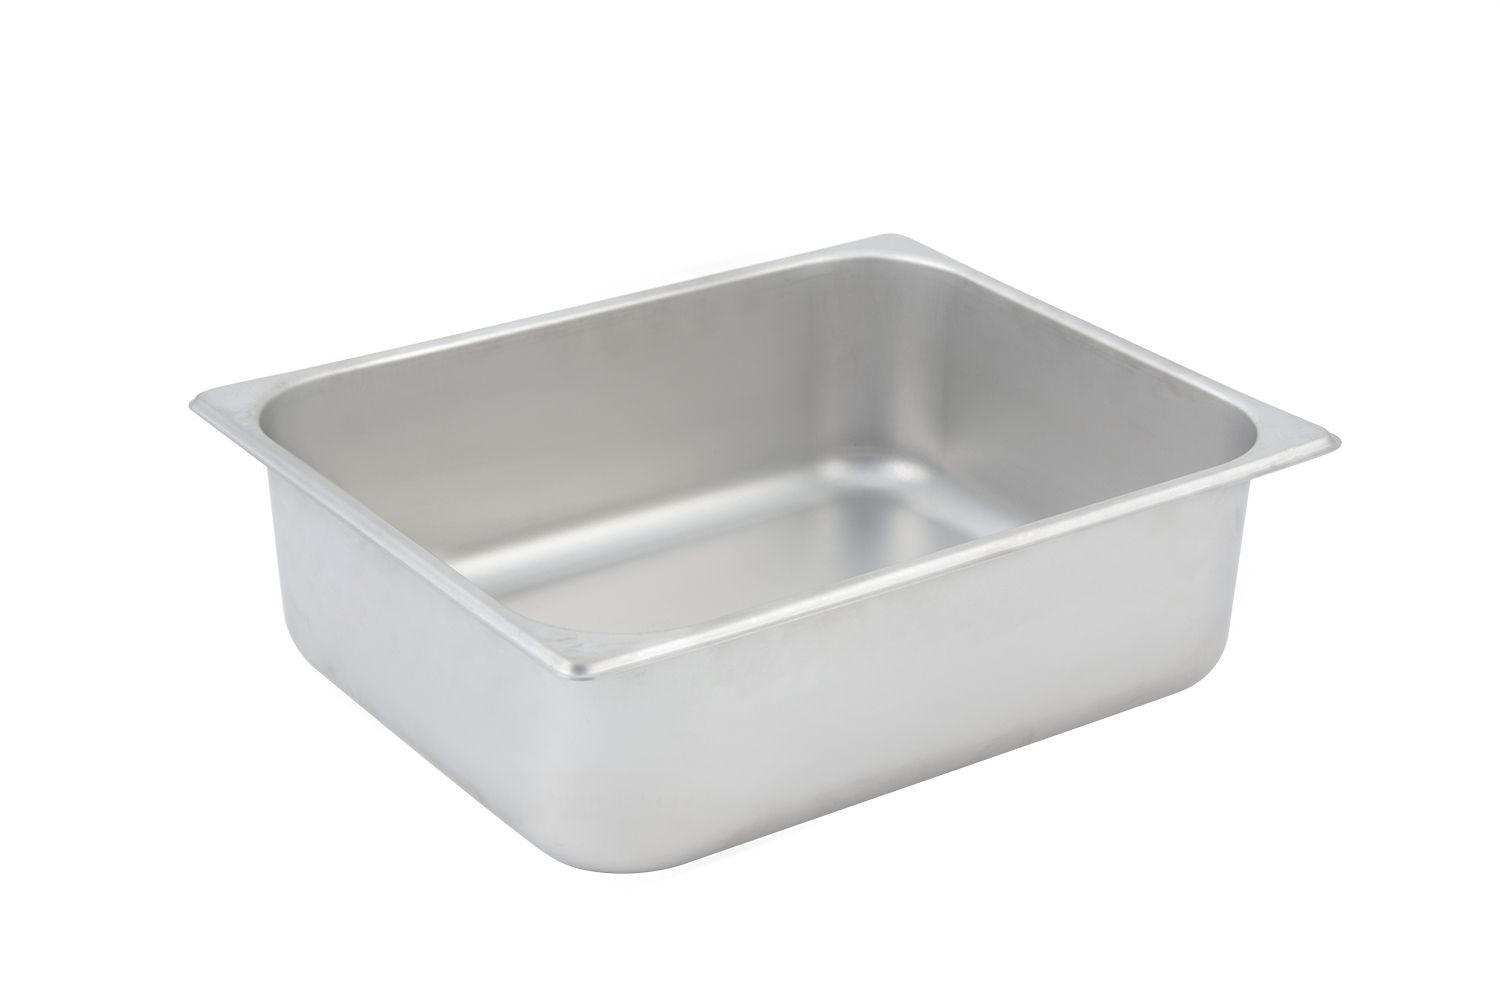 Bon Chef 12023 Stainless Steel Water Pan for 19150CH, 12 7/8" x 10 1/2" x 4"